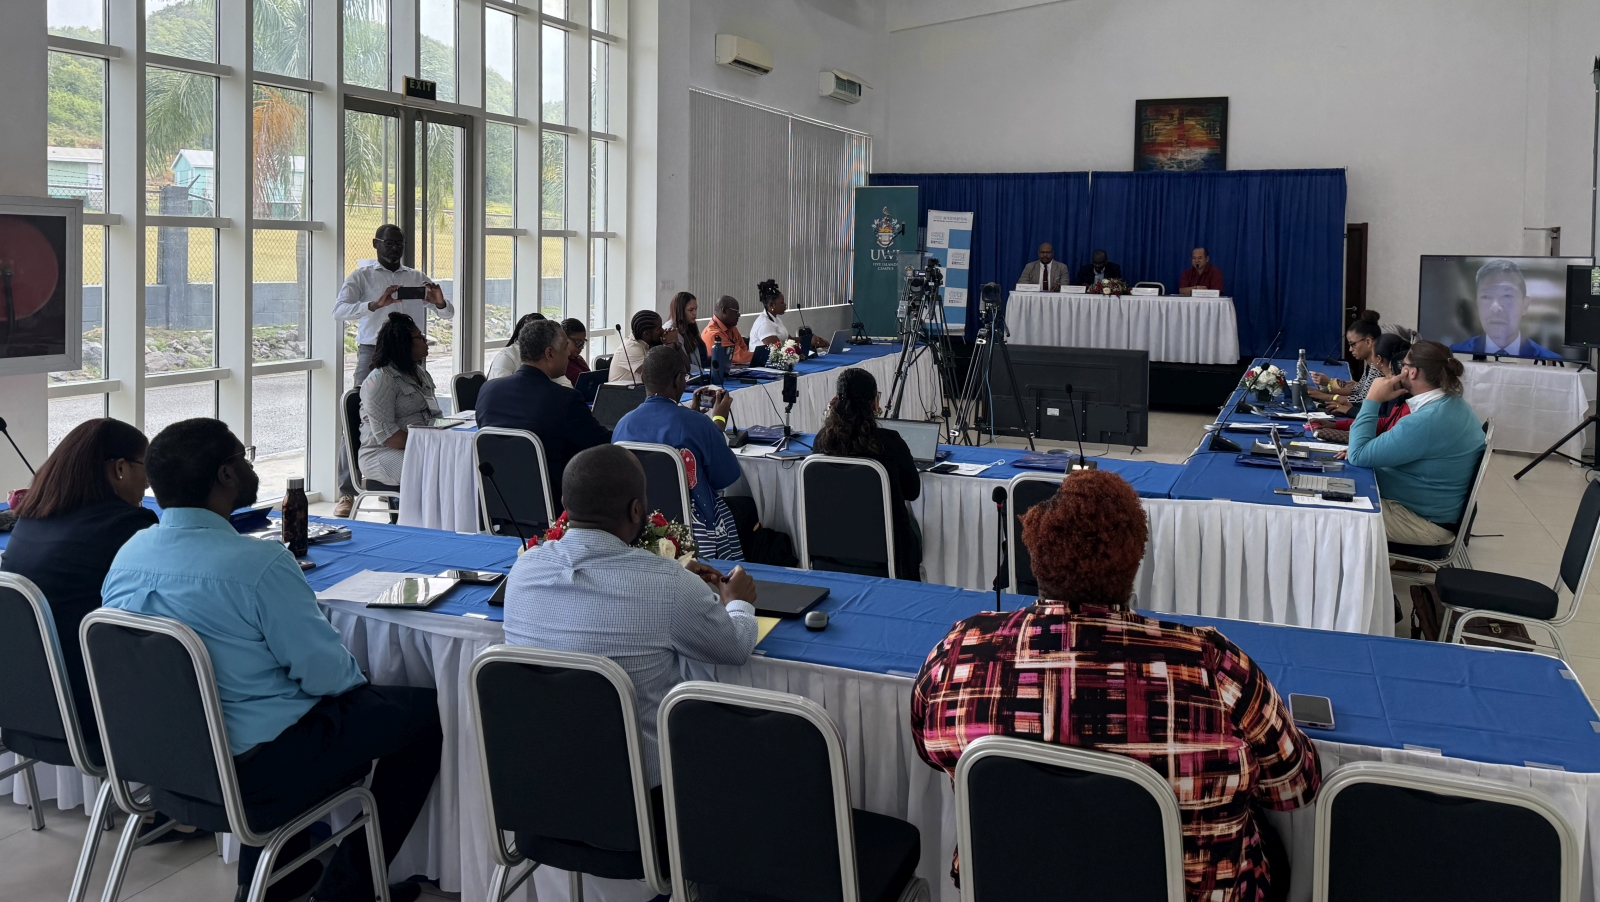 [Event Report] The International Workshop on Sustainable Blue Economies in the Caribbean Islands and low-lying communities